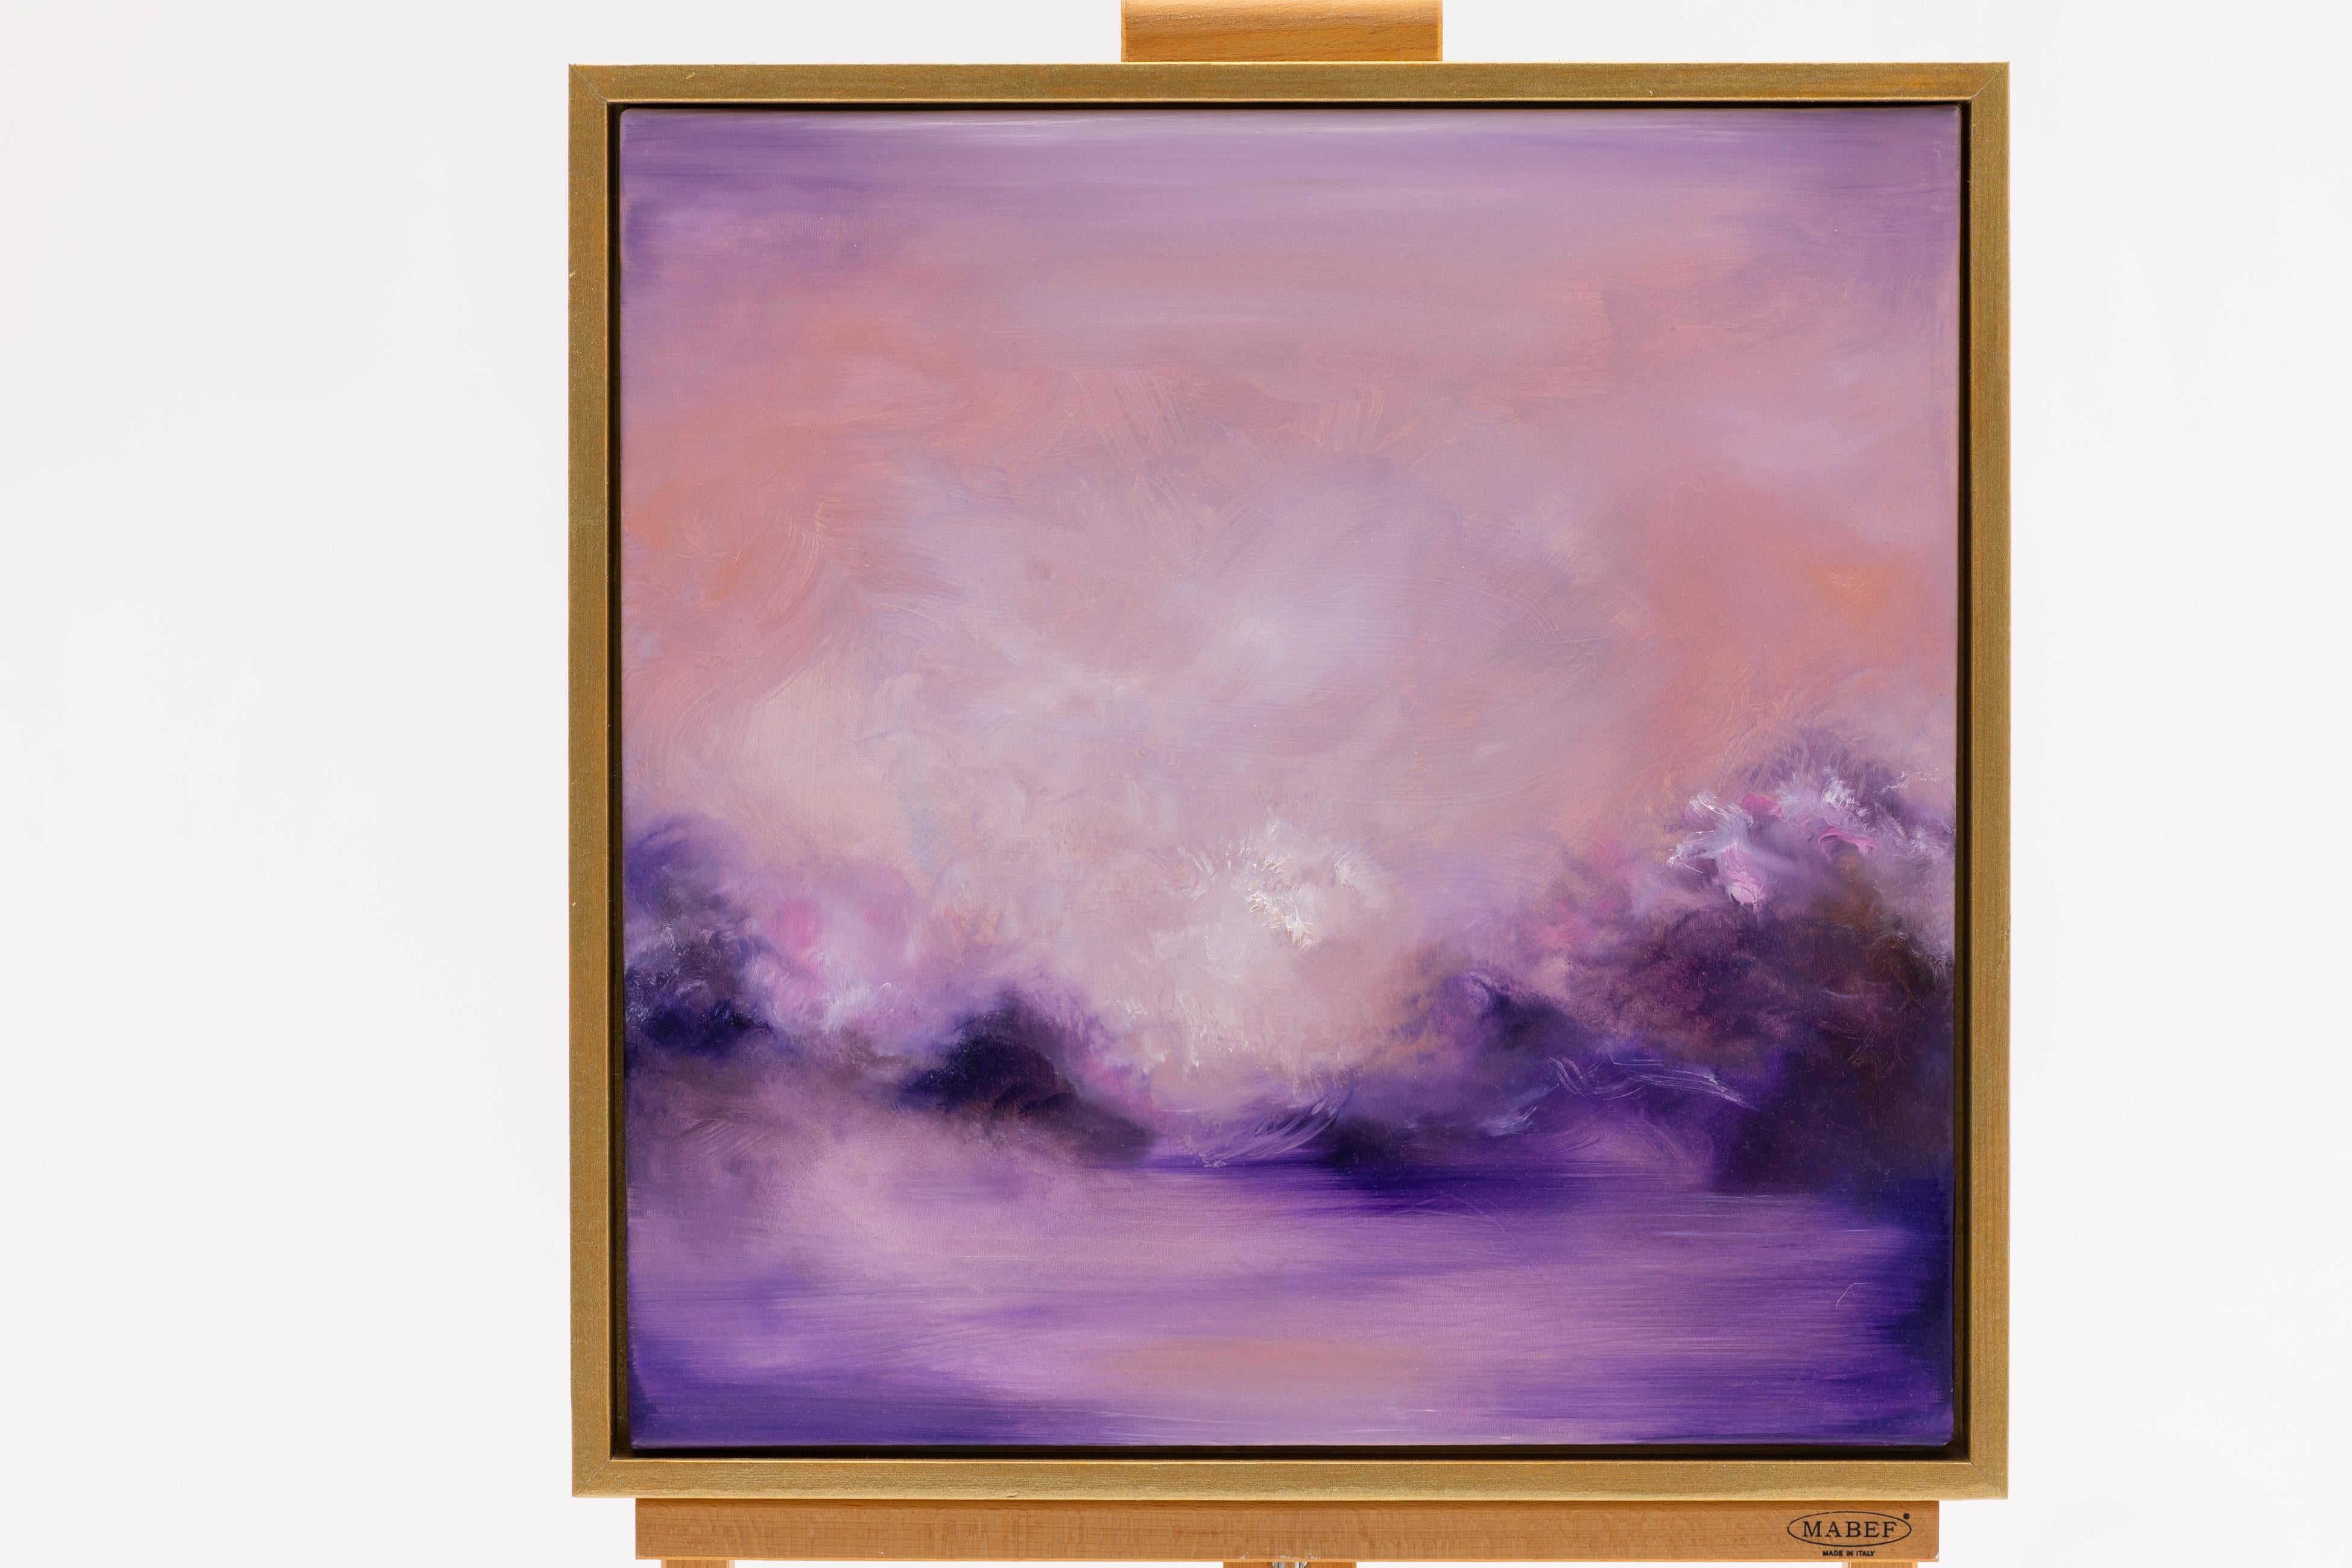 I am on fire - Abstract sunset painting, pink, violet, crimson sky - Painting by Jennifer L. Baker